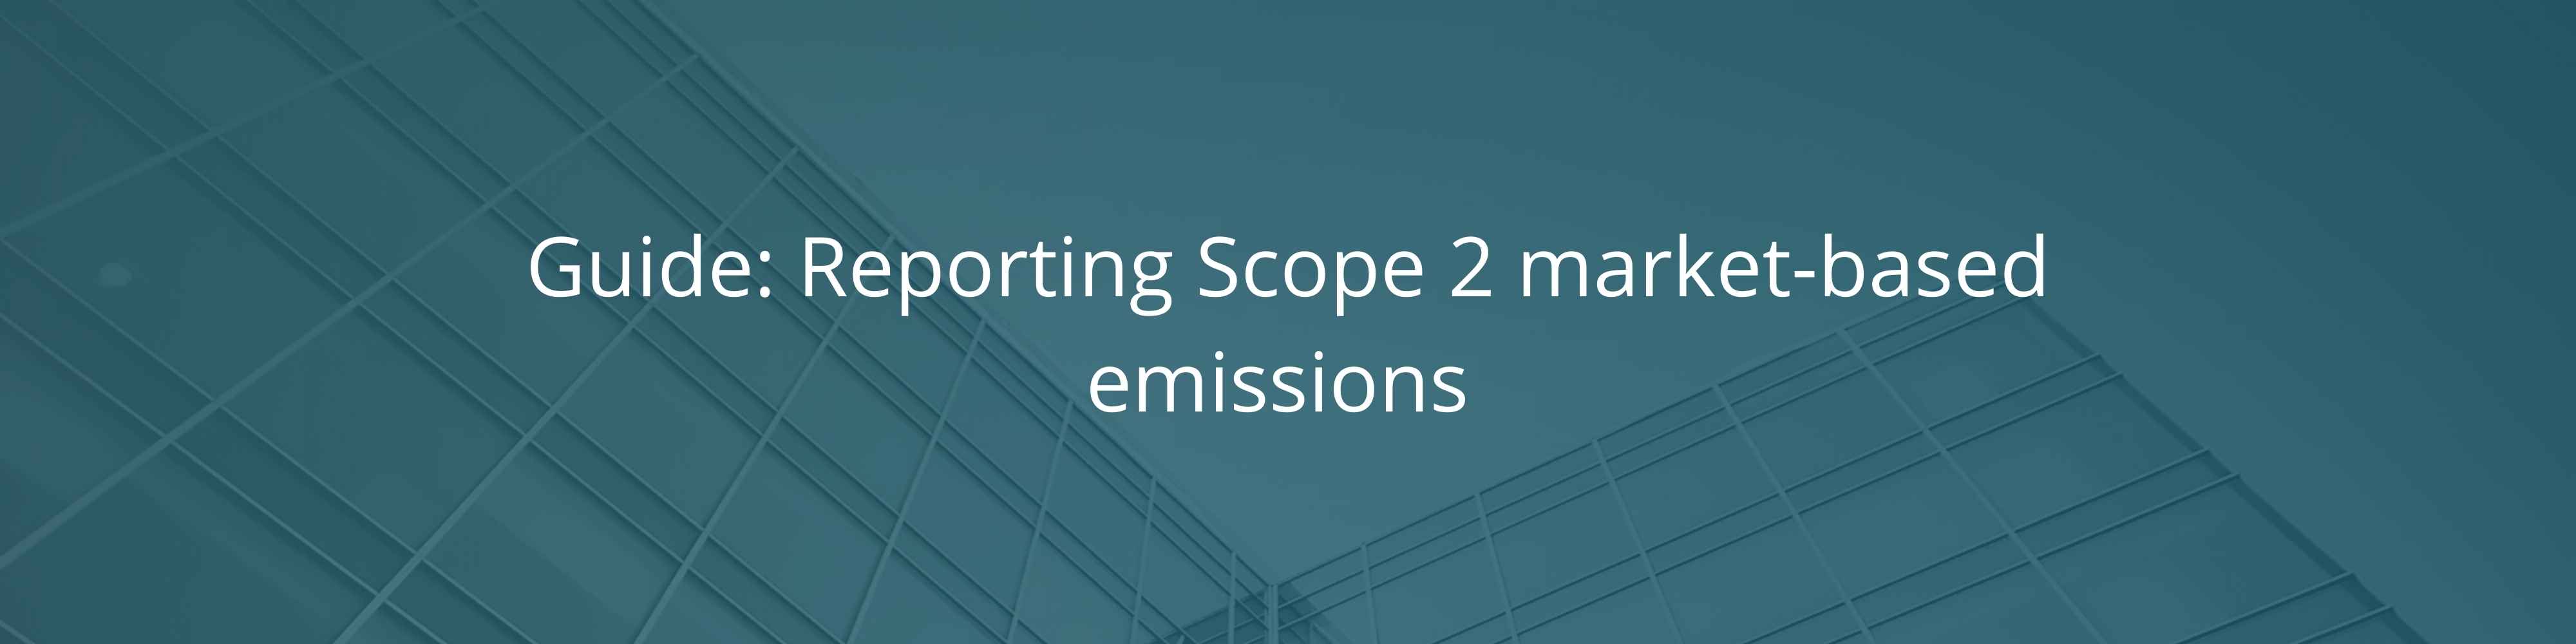 Thank you for downloading Greenstone's scope 2 guide 